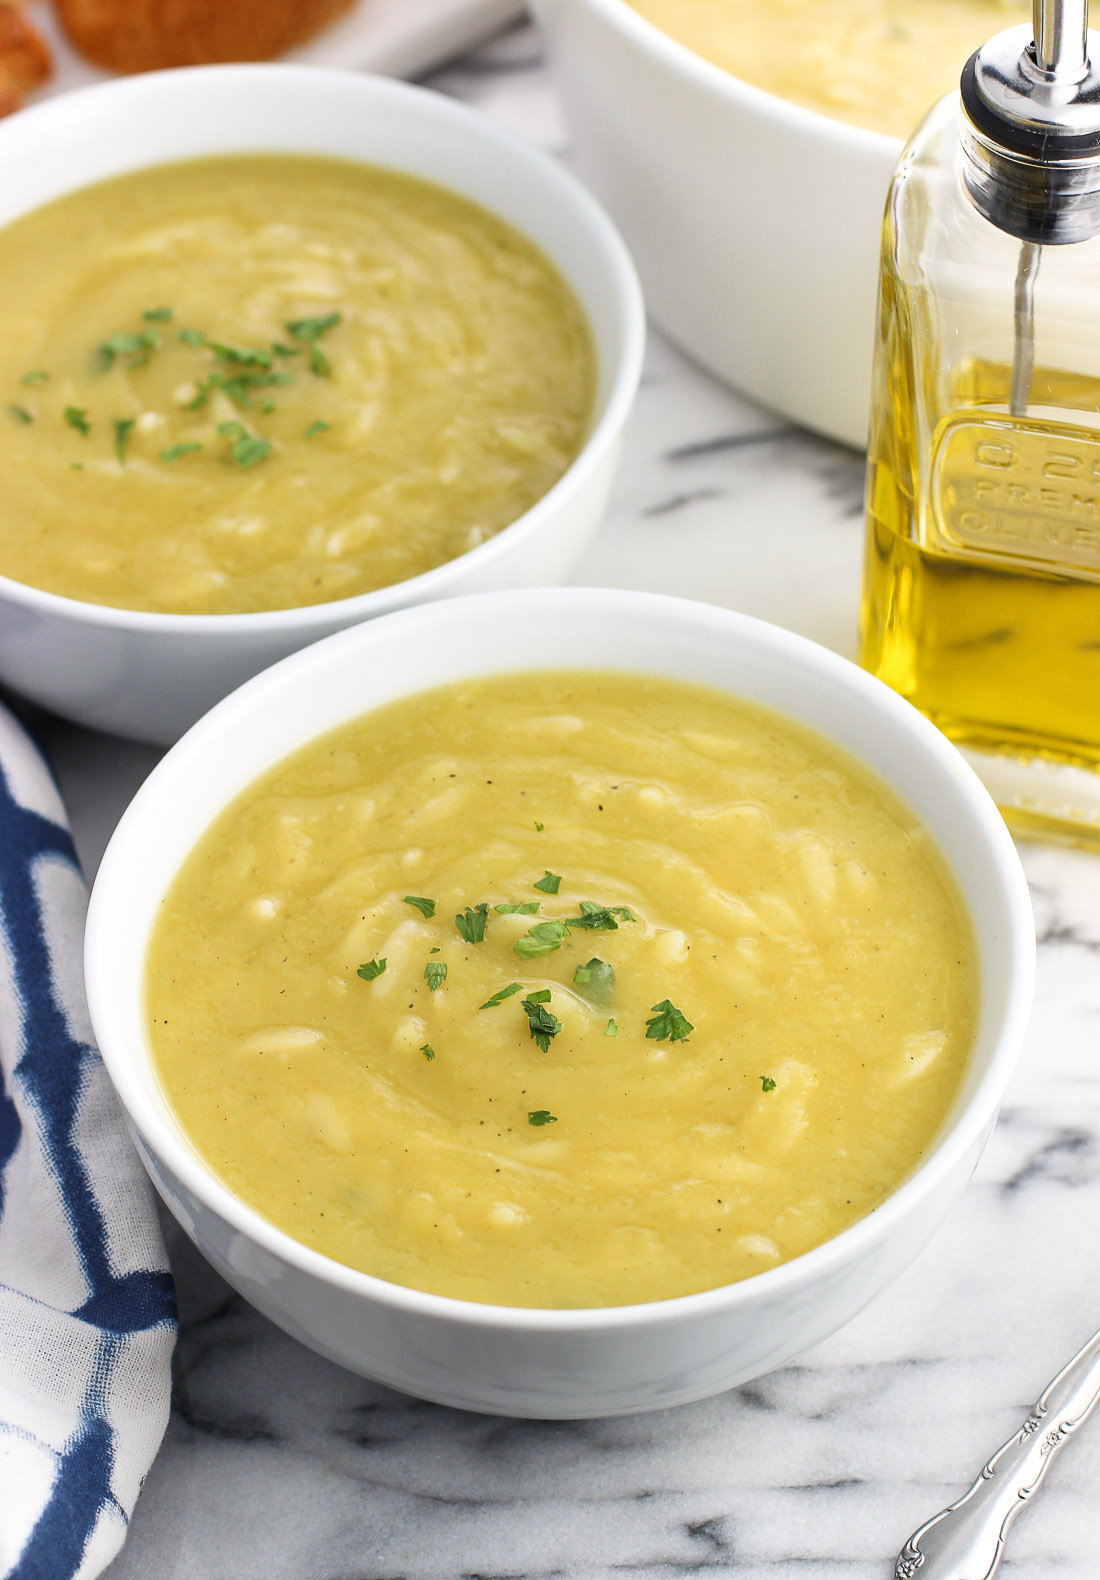 Healthy Potato soup Recipe Easy 20 Of the Best Ideas for Healthy Potato Leek soup with orzo